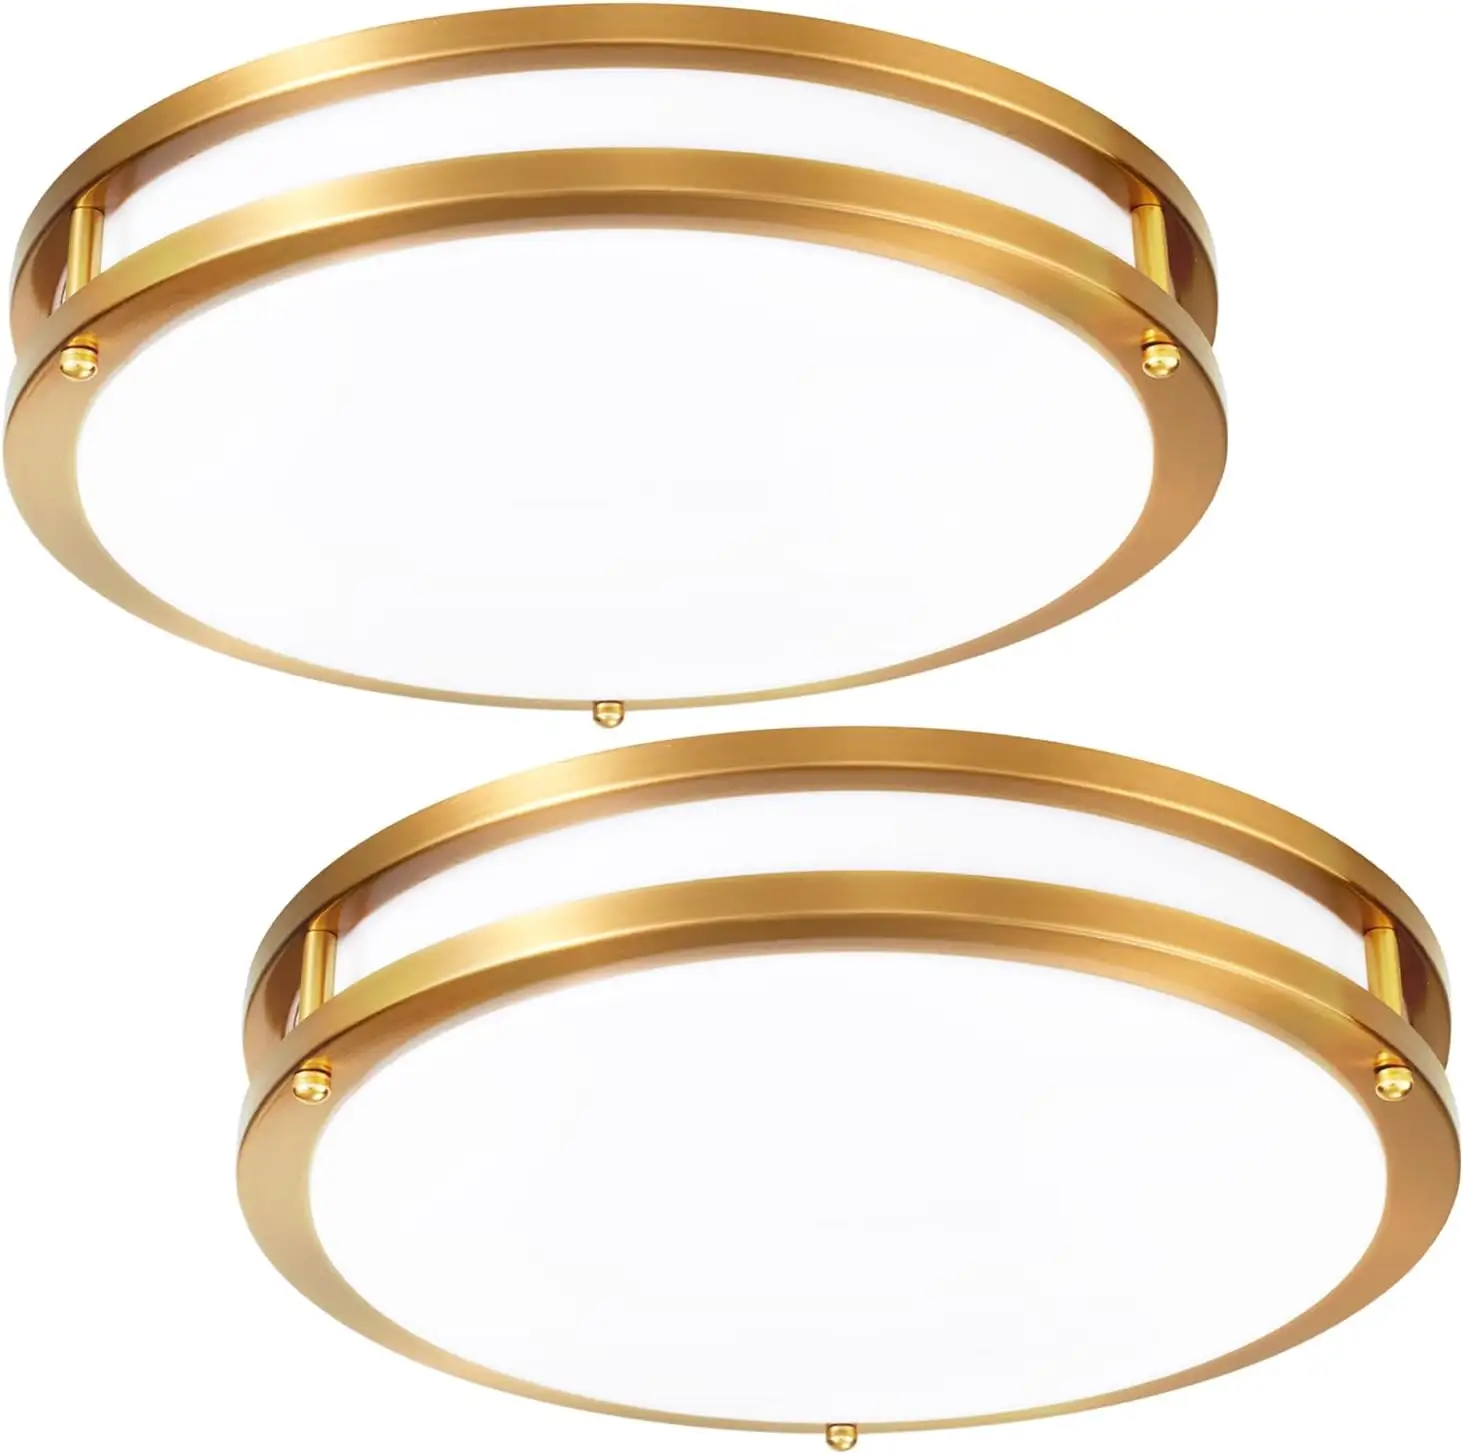 Gold Ceiling Light Recessed LED Dimmable For Bedroom Living Room Kitchen Lighting